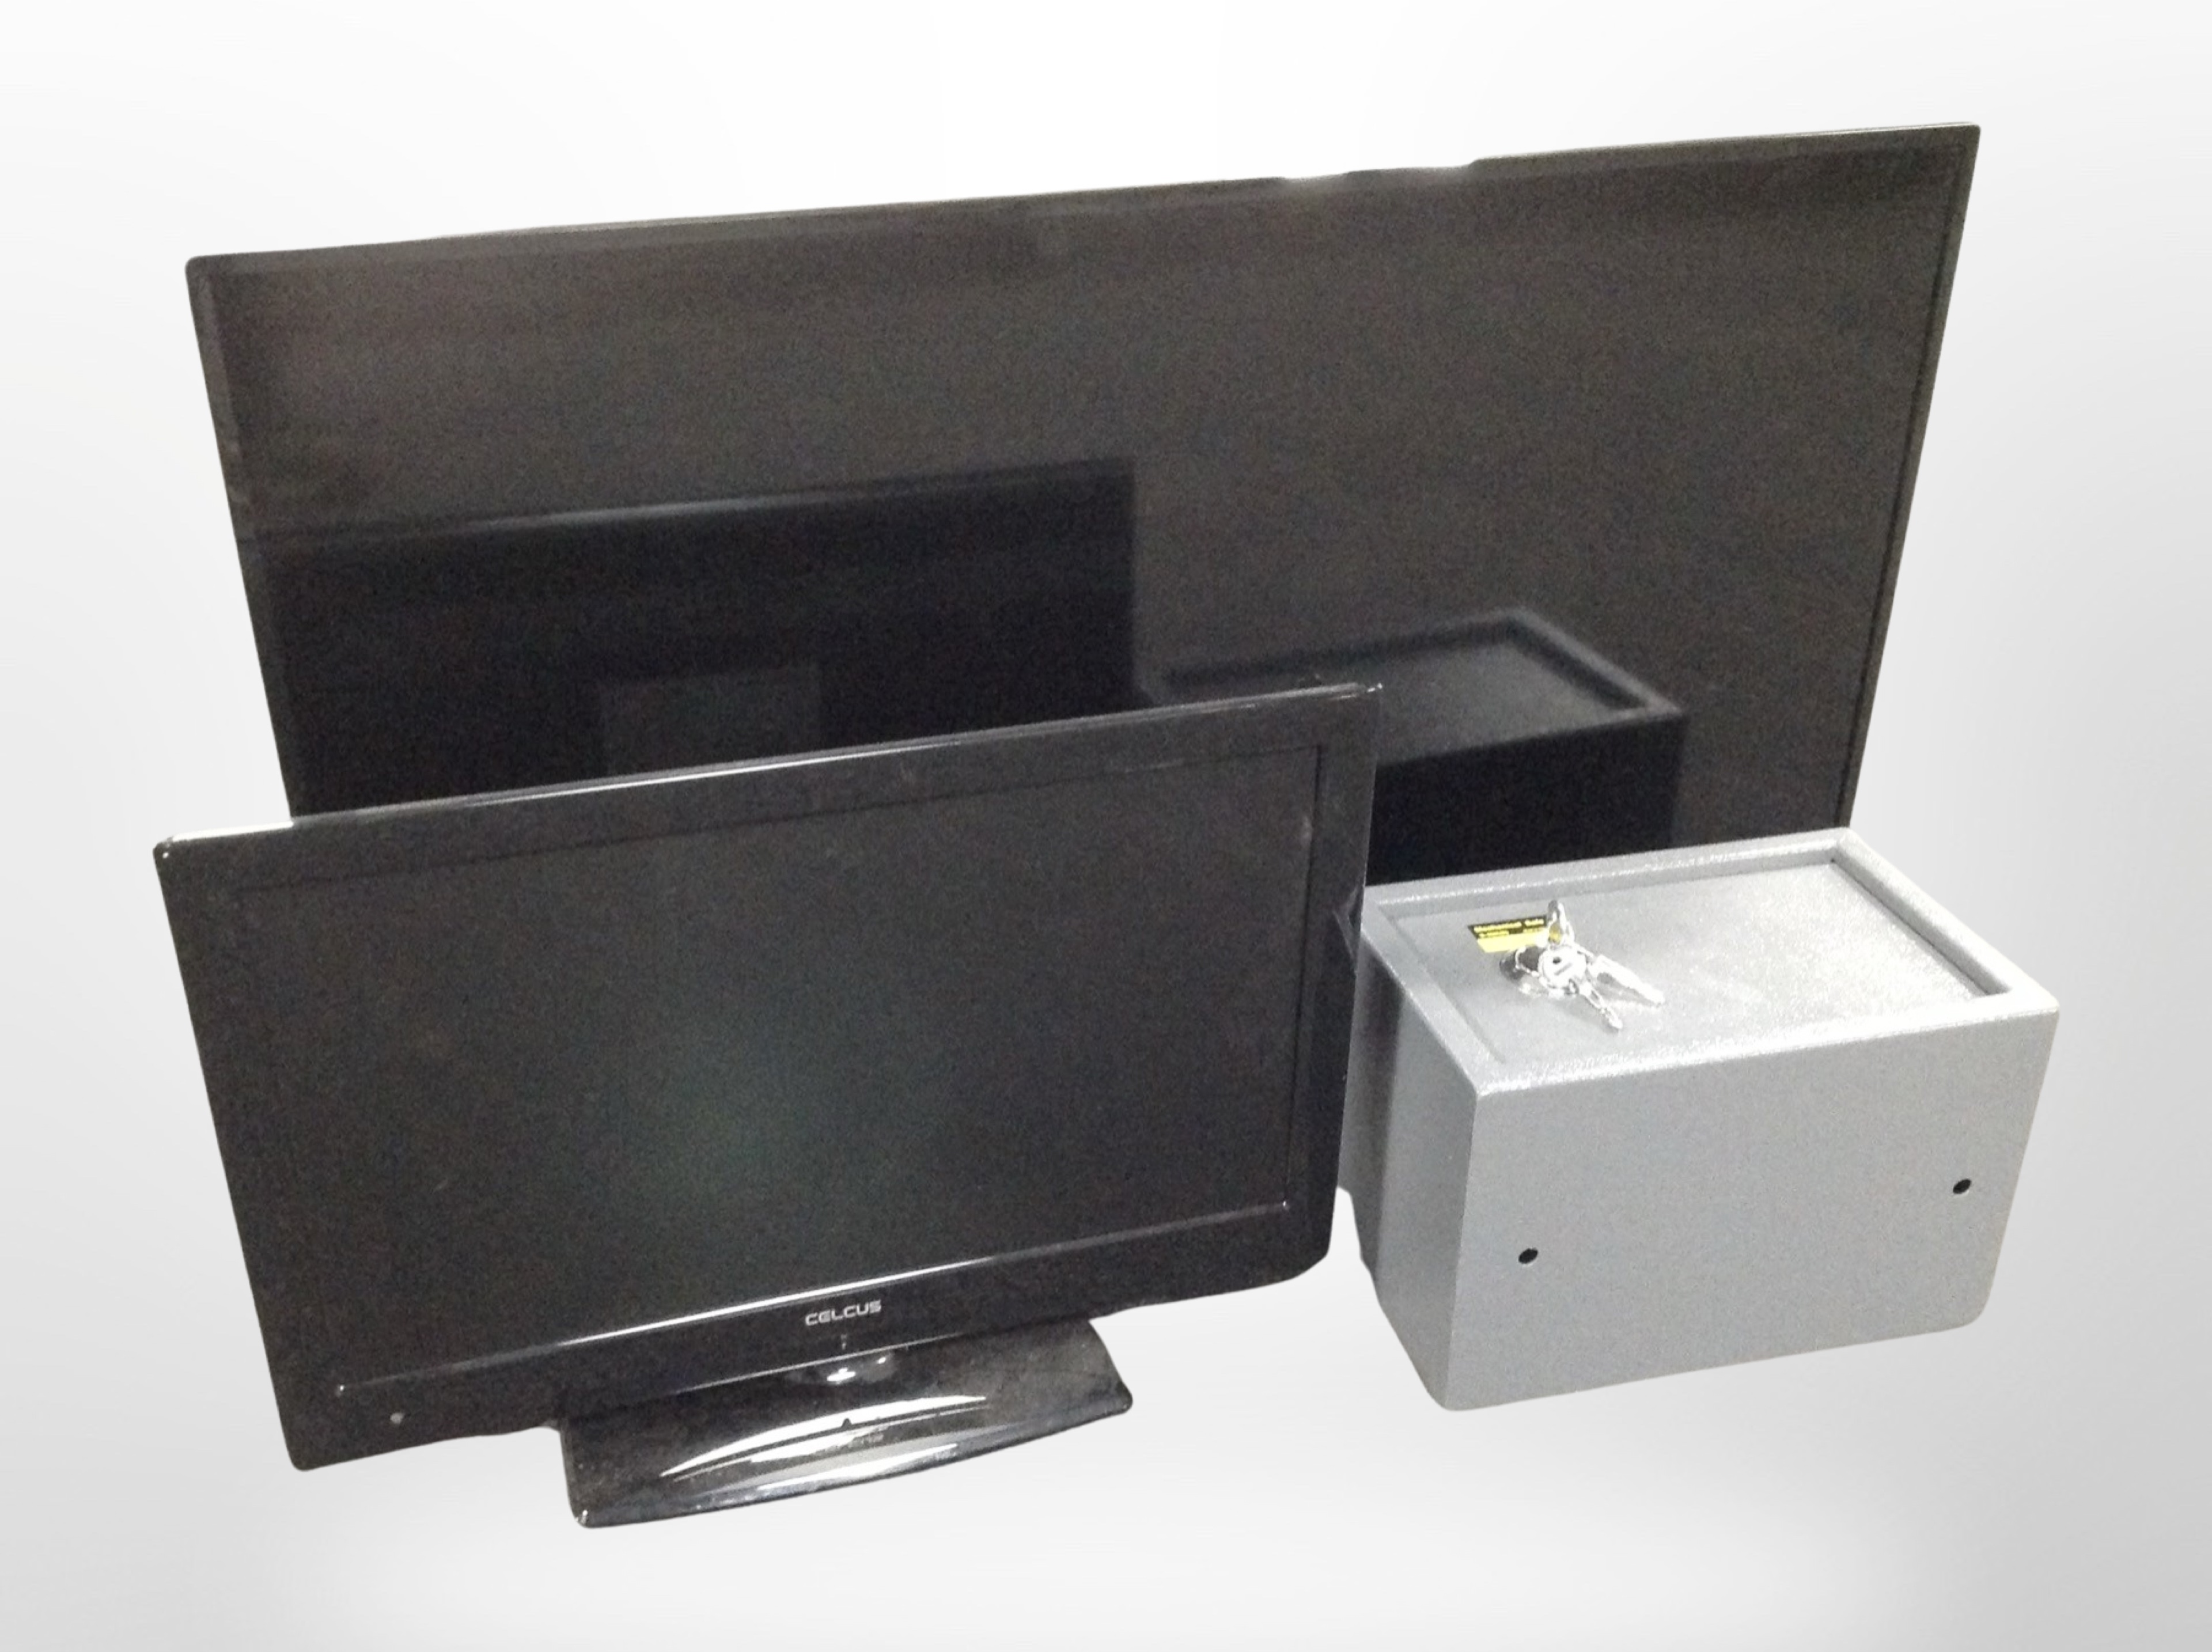 A Panasonic 40-inch LCD TV with remote, a further TV with remote, and a small safe with keys.